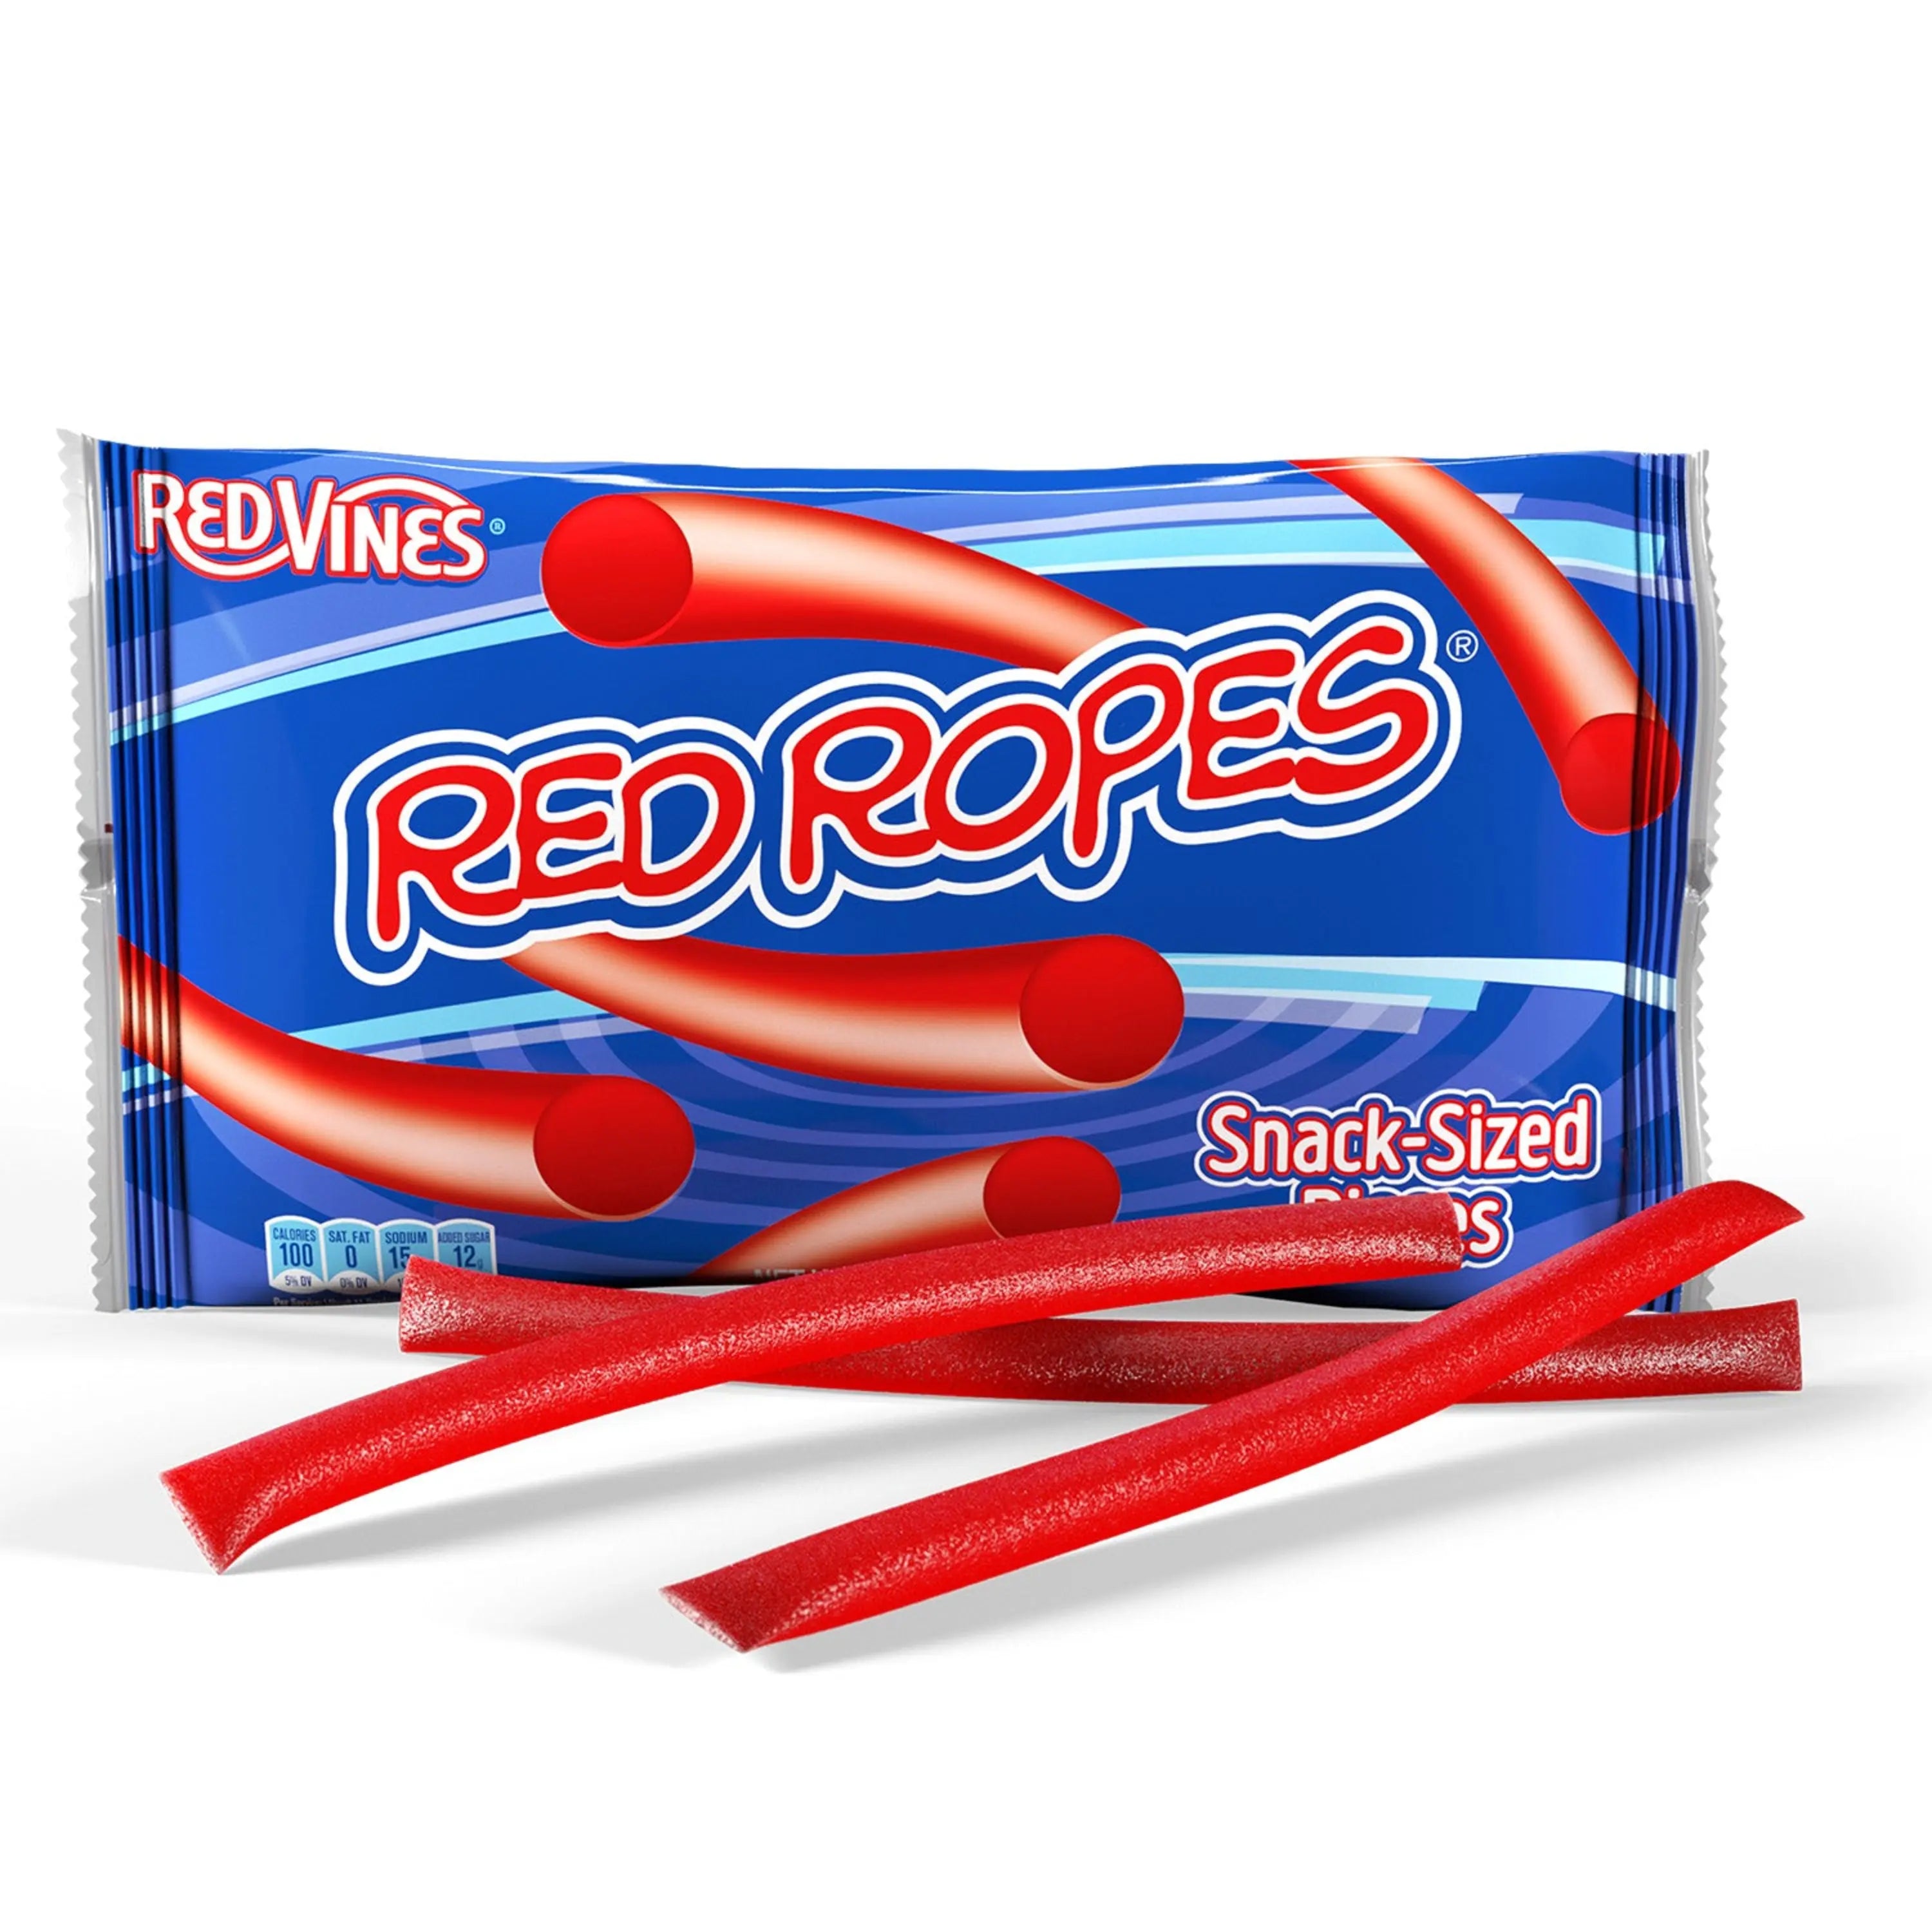 RED VINES Red Ropes Licorice Candy front of 12oz bag with rope candy pieces in front